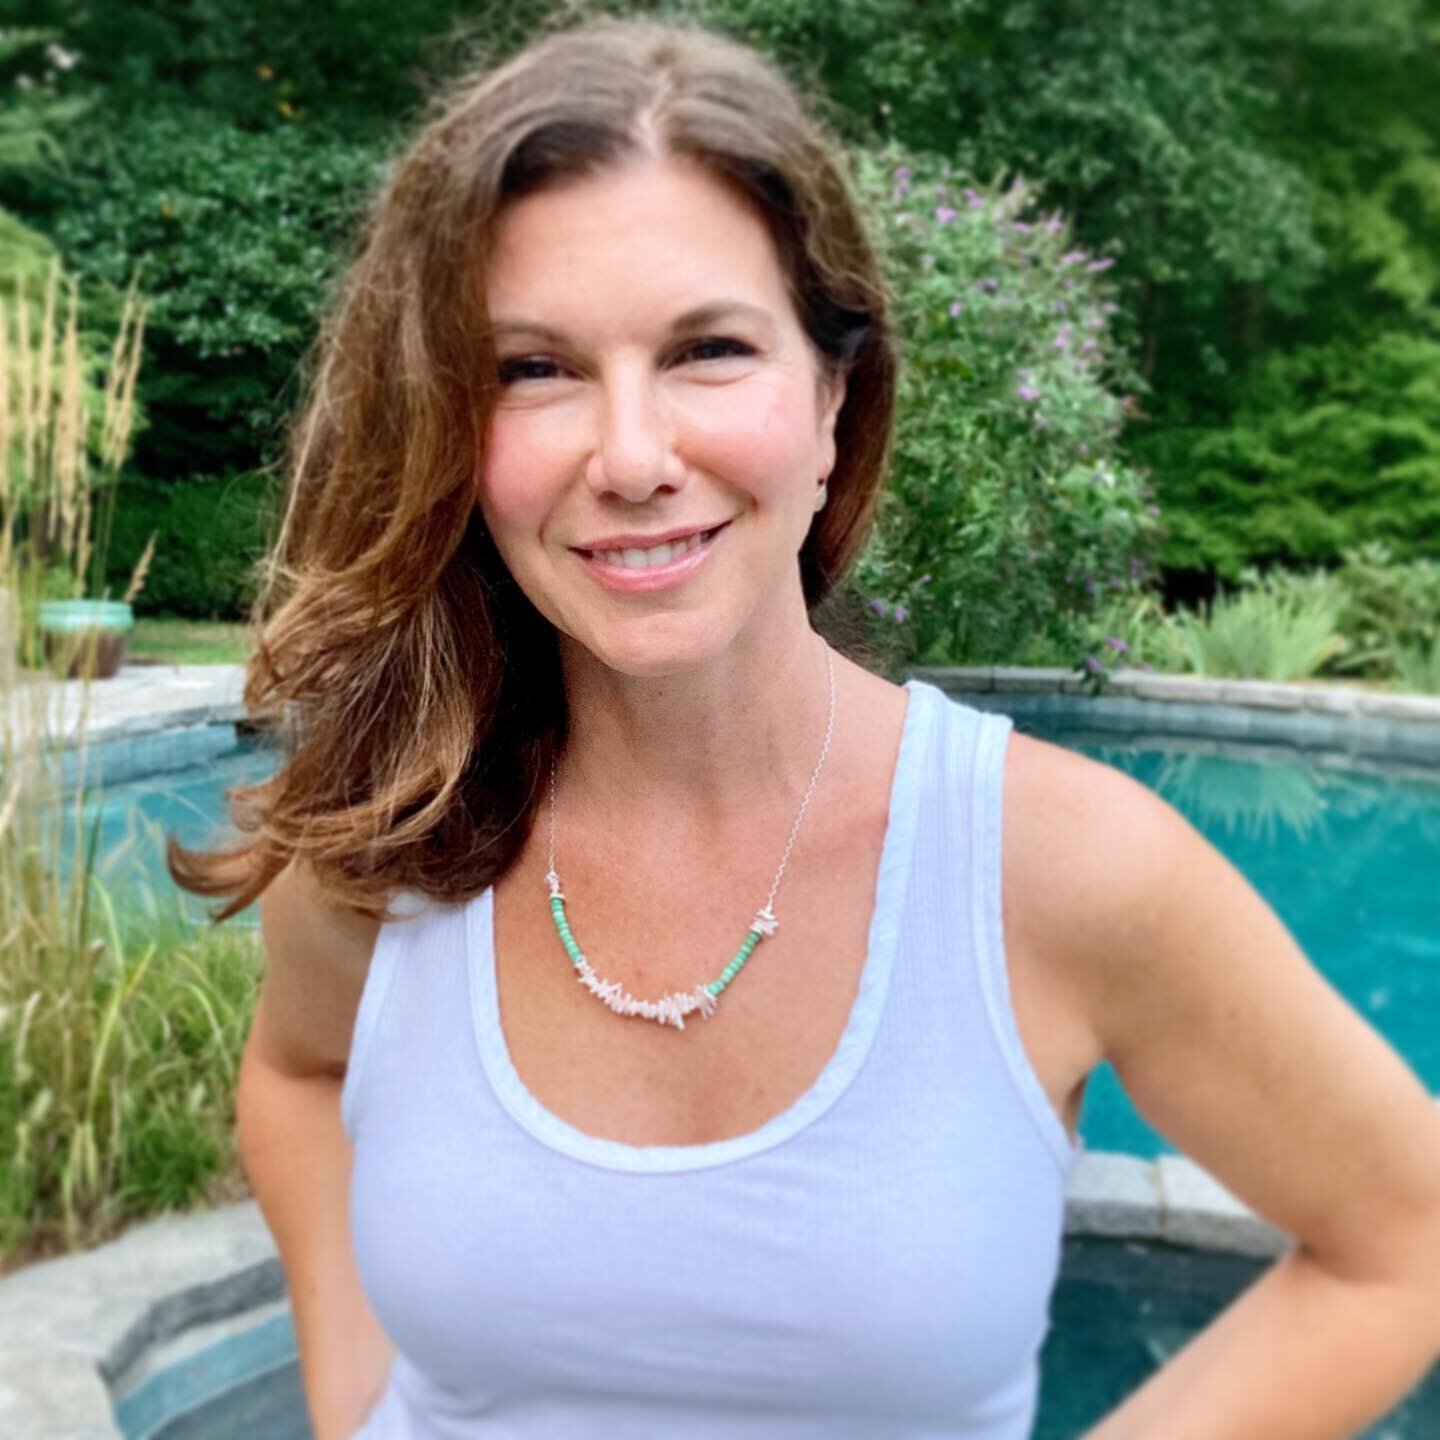 ✨
SUMMER STREET STUDIO PEONY COLLECTION 🌸 🍃 Each is hand made and one of a kind!
✨
The beautiful @hfthiel is wearing this joyfully bright necklace of chrysoprase, a symbol of happiness thought to help open communication, which is set off here with 